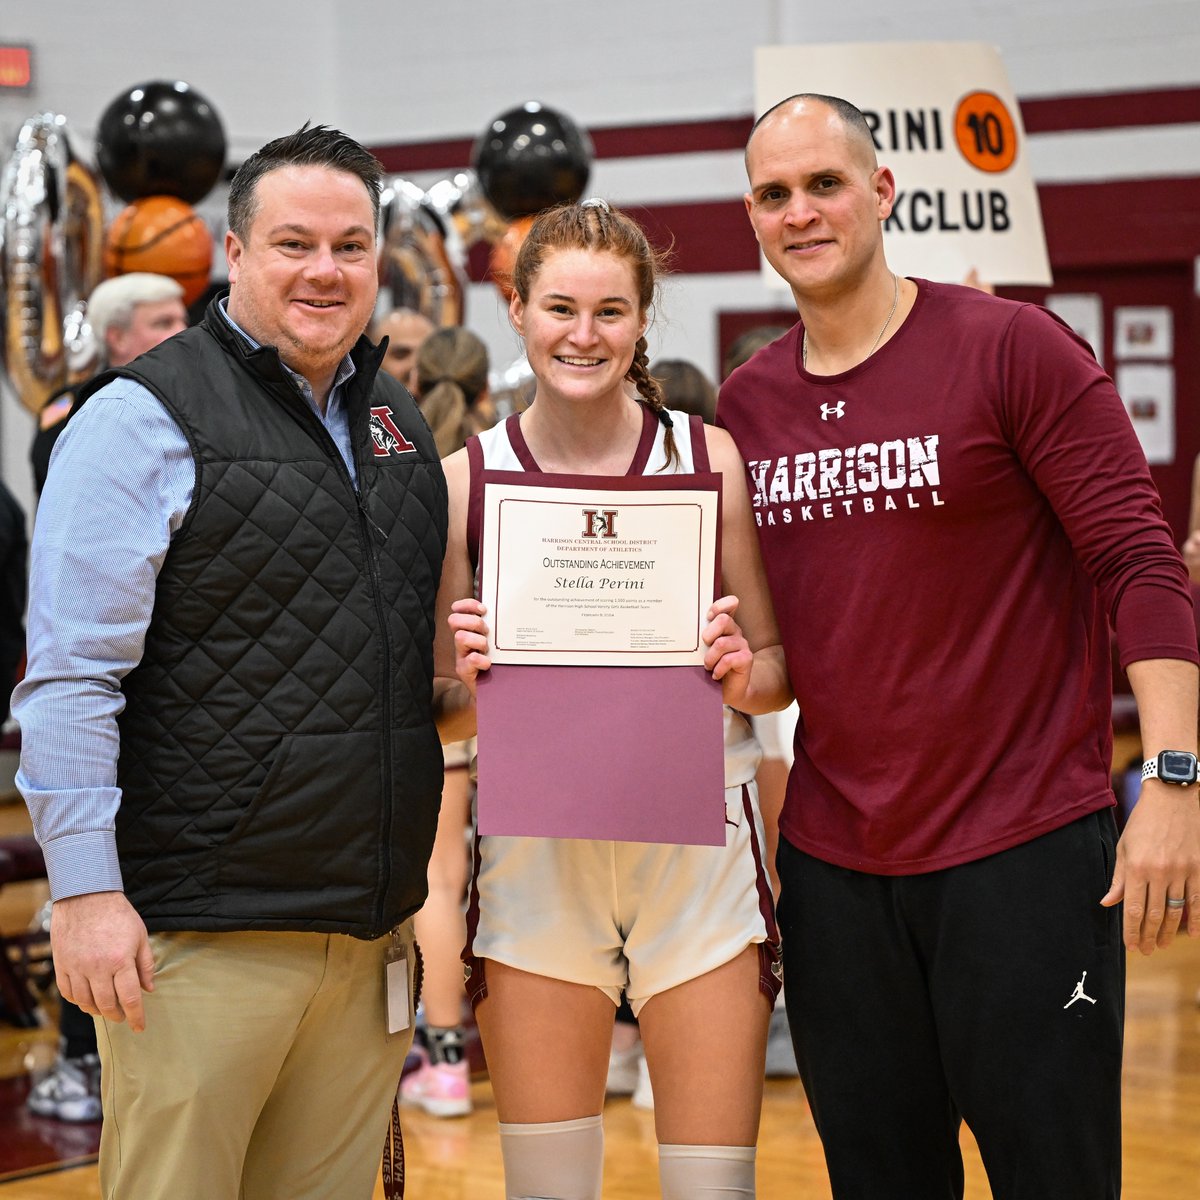 Stella Perini notched her 1,000th career point tonight in @htown_huskies W over Mt. Vernon. She needed 13 and finished with 19 total 'My dad always kept my point totals, I never wanted to know,' said Perini. 'Two games ago, Kail told me I had only 25 left so it became real.'